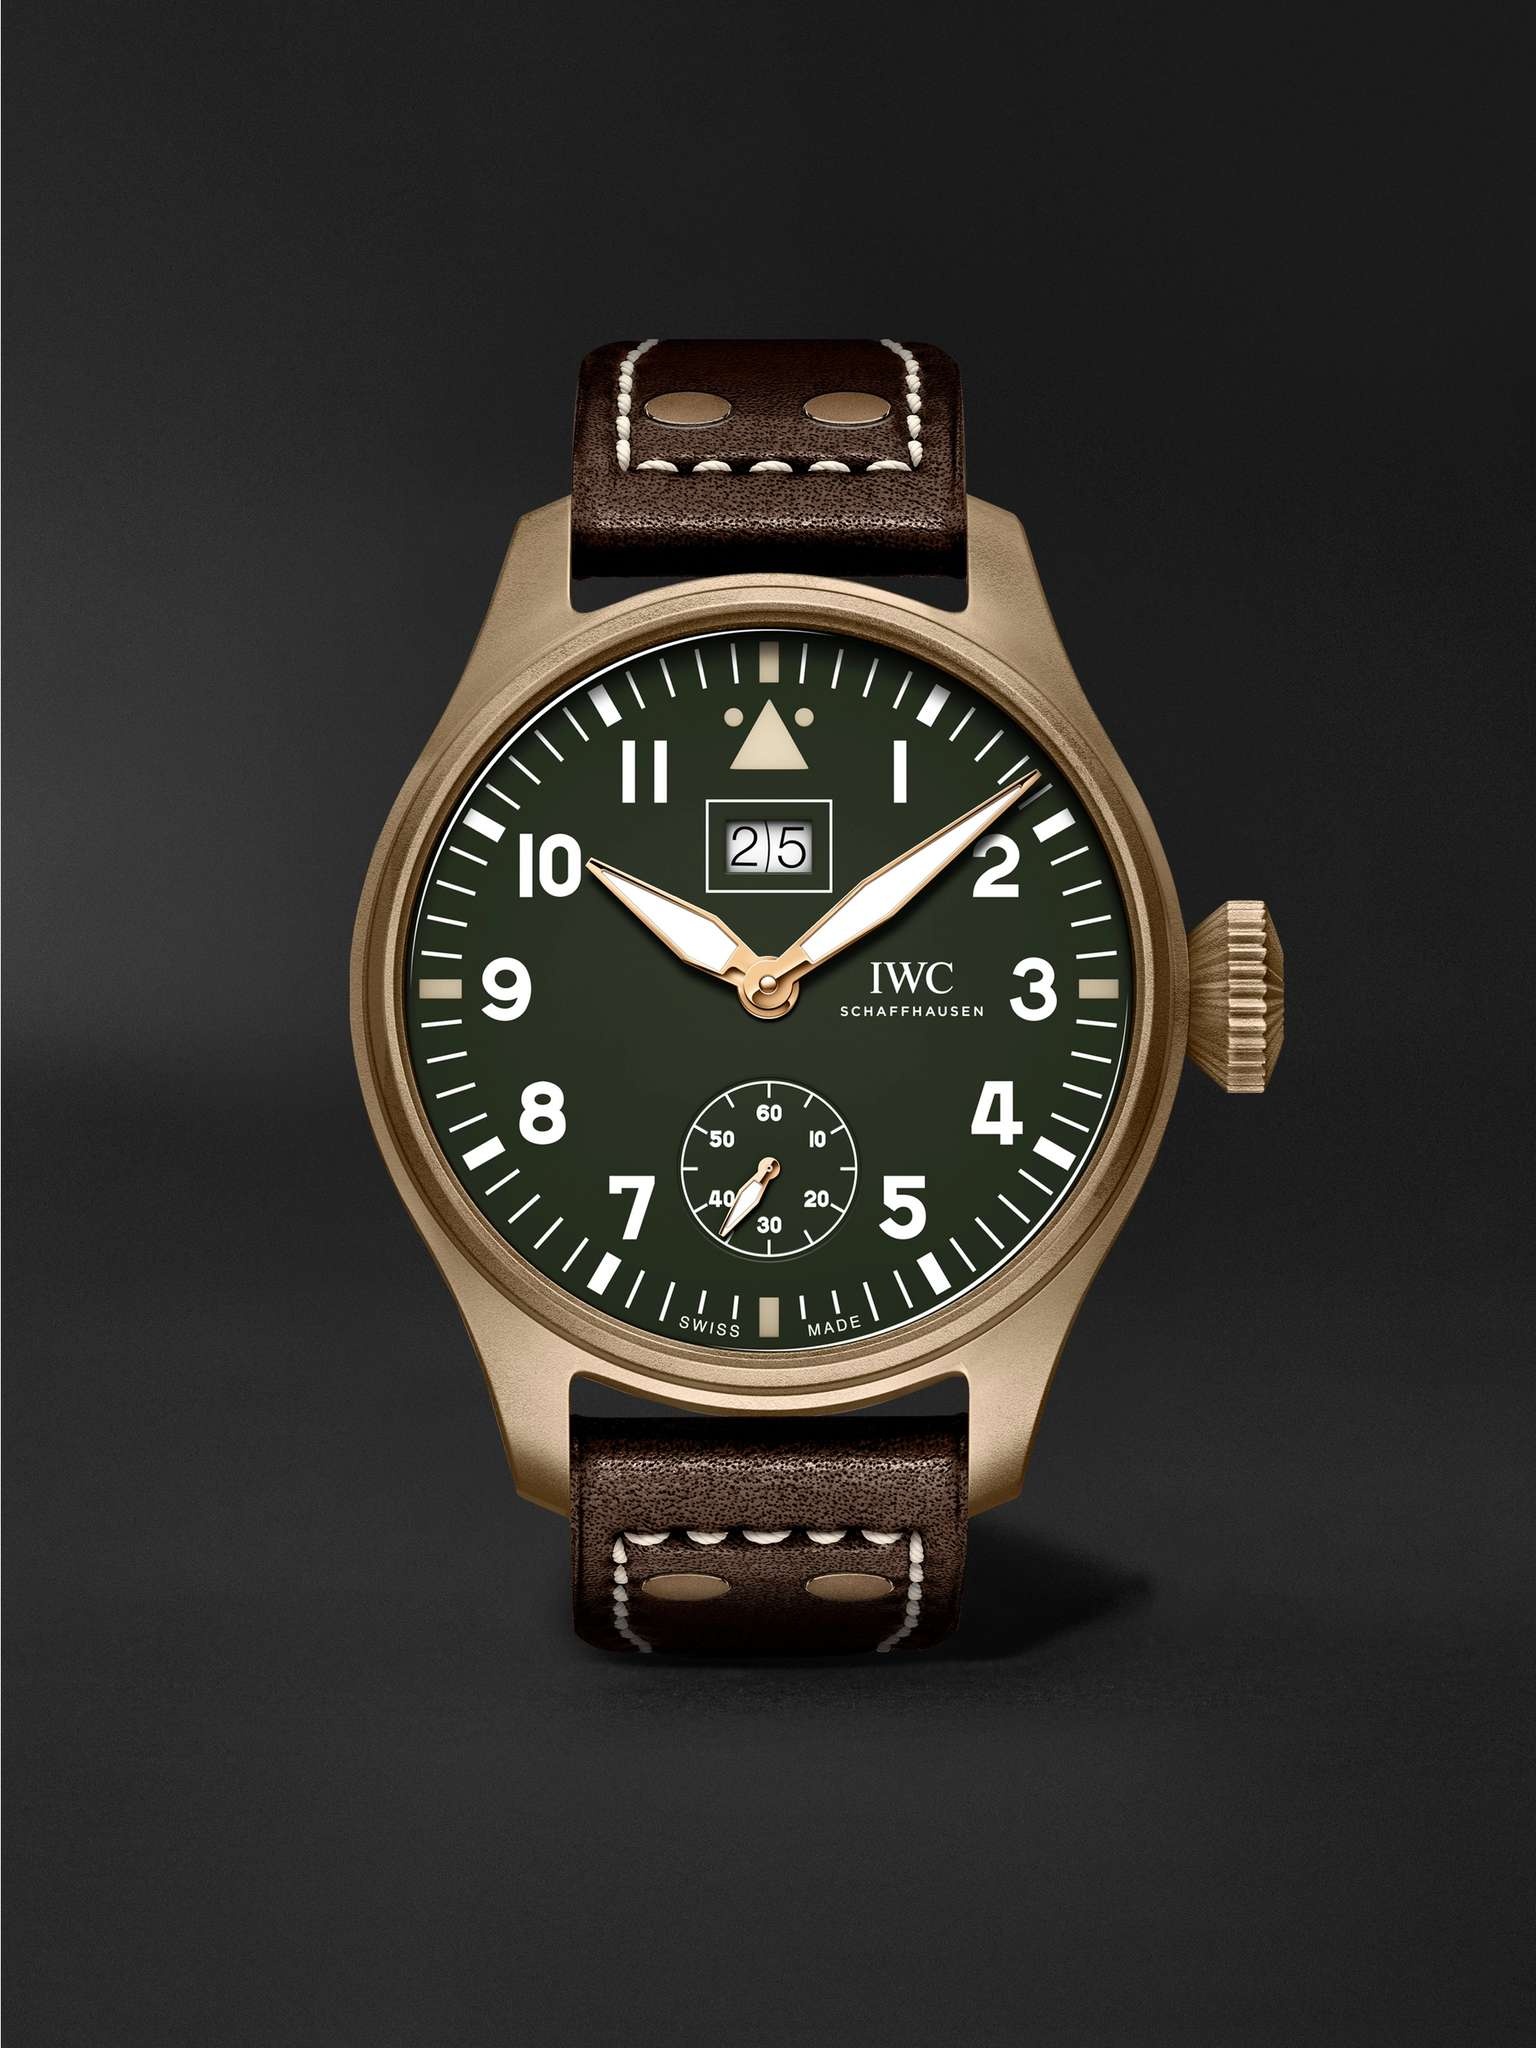 Big Pilot's Big Date Spitfire ‘Mission Accomplished’ Limited Edition Hand-Wound 46.2mm Bronze and Le - 1